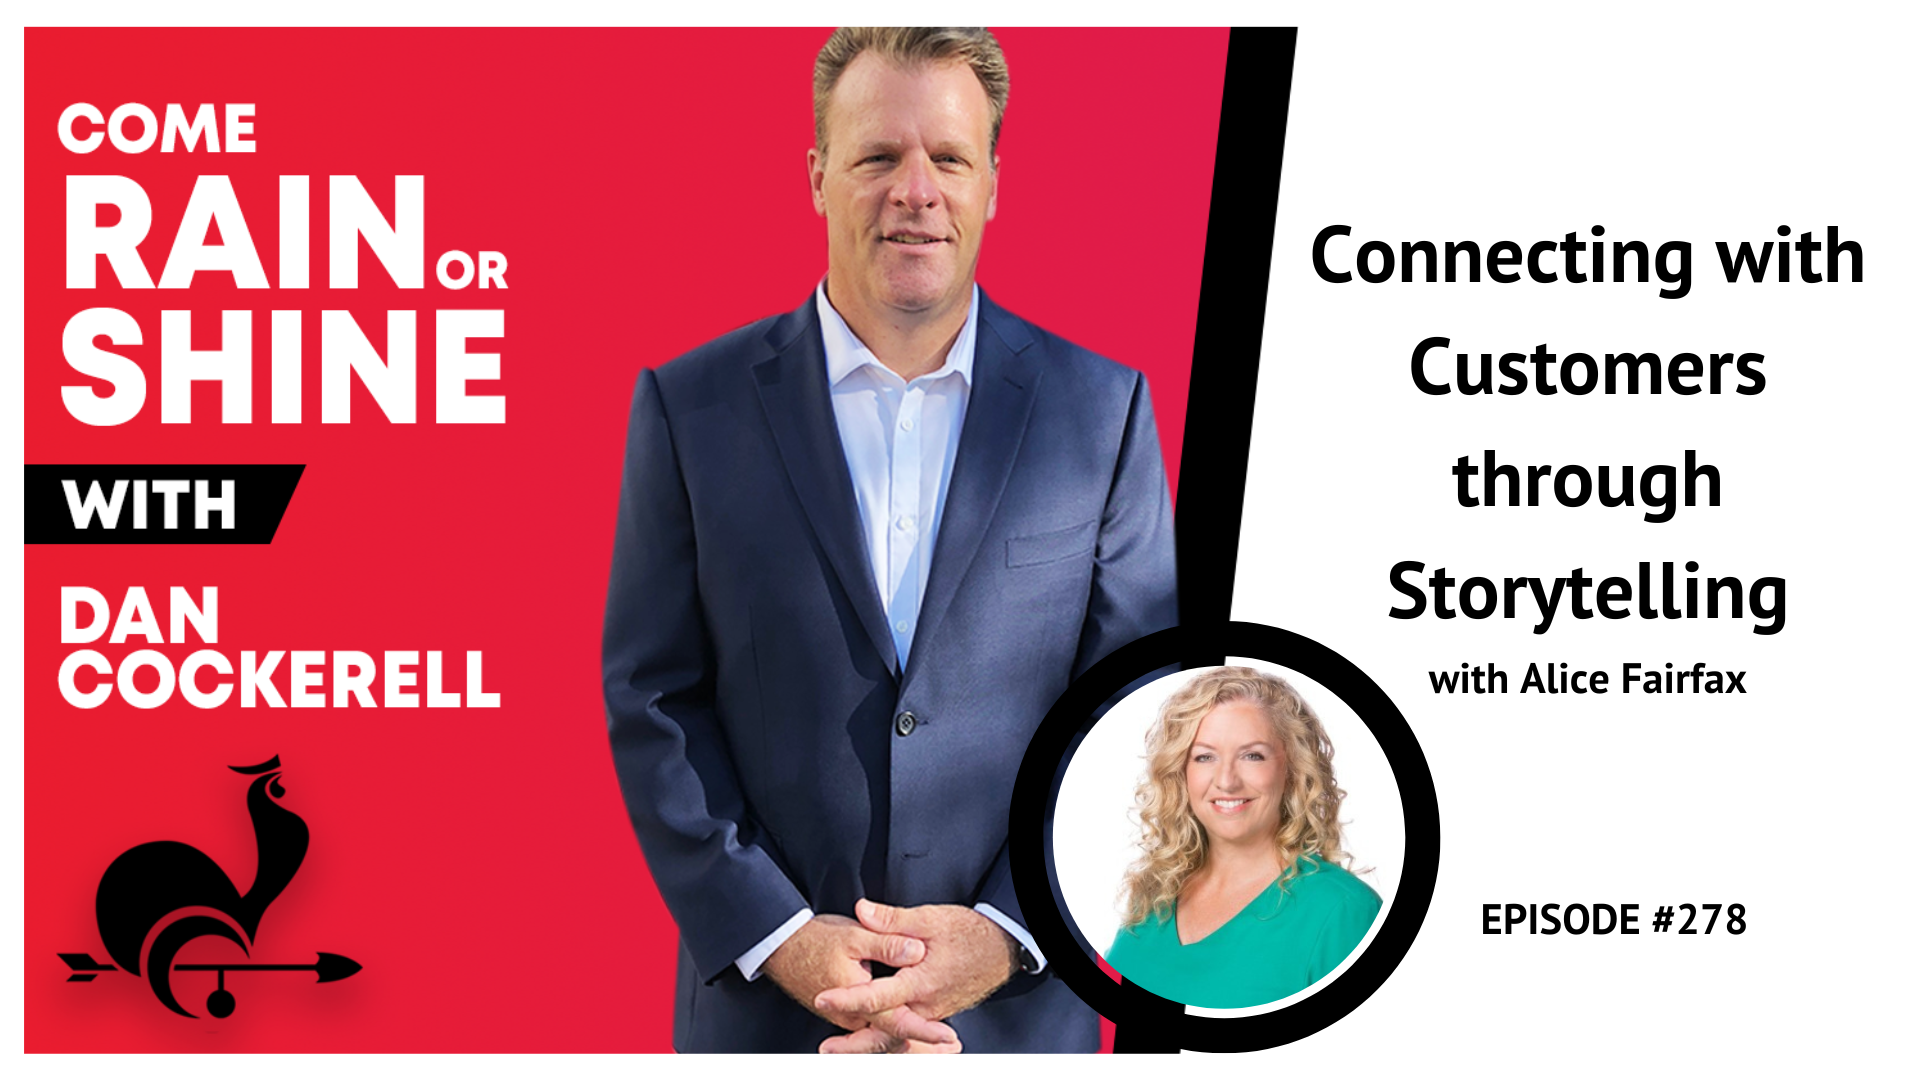 Come Rain or Shine Episode 278 Connecting with Customers through Storytelling